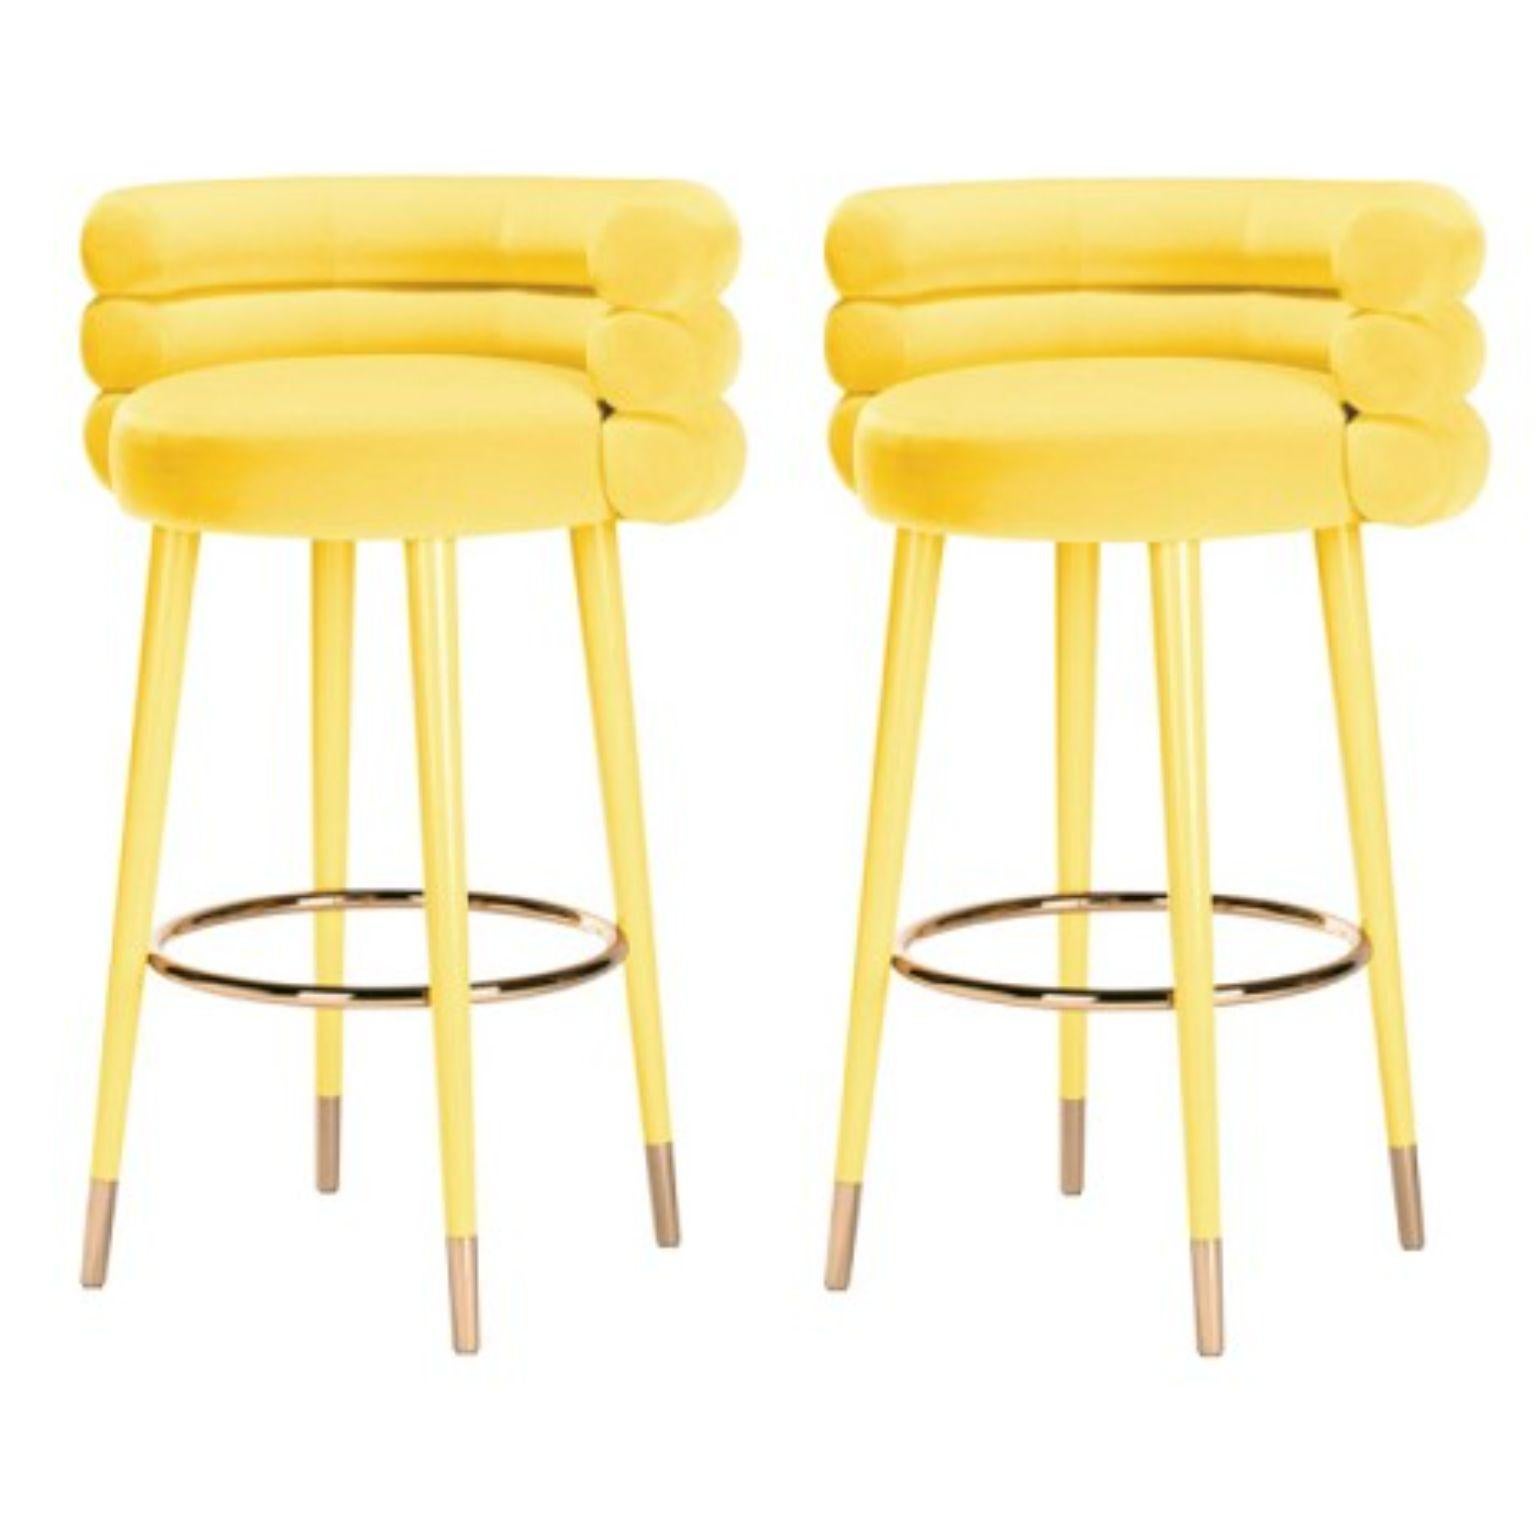 Set of 2 marshmallow bar stools, royal stranger
Dimensions: 100 x 70 x 60 cm
Materials: Velvet upholstery, brass
Available in: Mint green, light pink, royal green, royal red.

Royal stranger is an exclusive furniture brand determined to bring